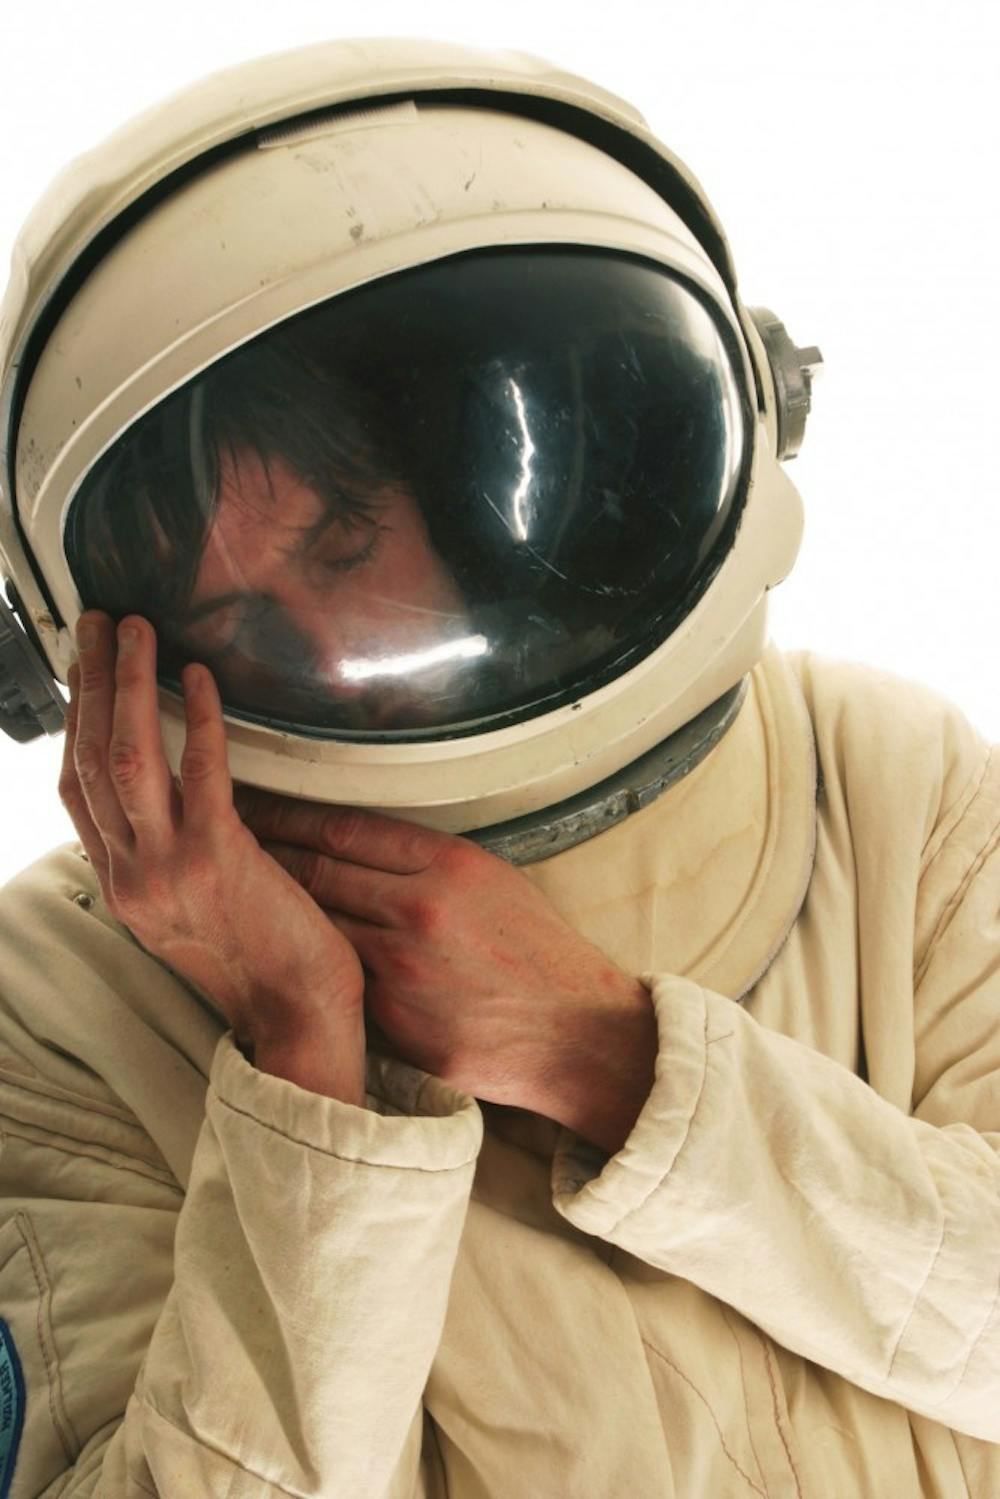 Jason Pierce sings of his near-death experience in Spiritualized’s new release.